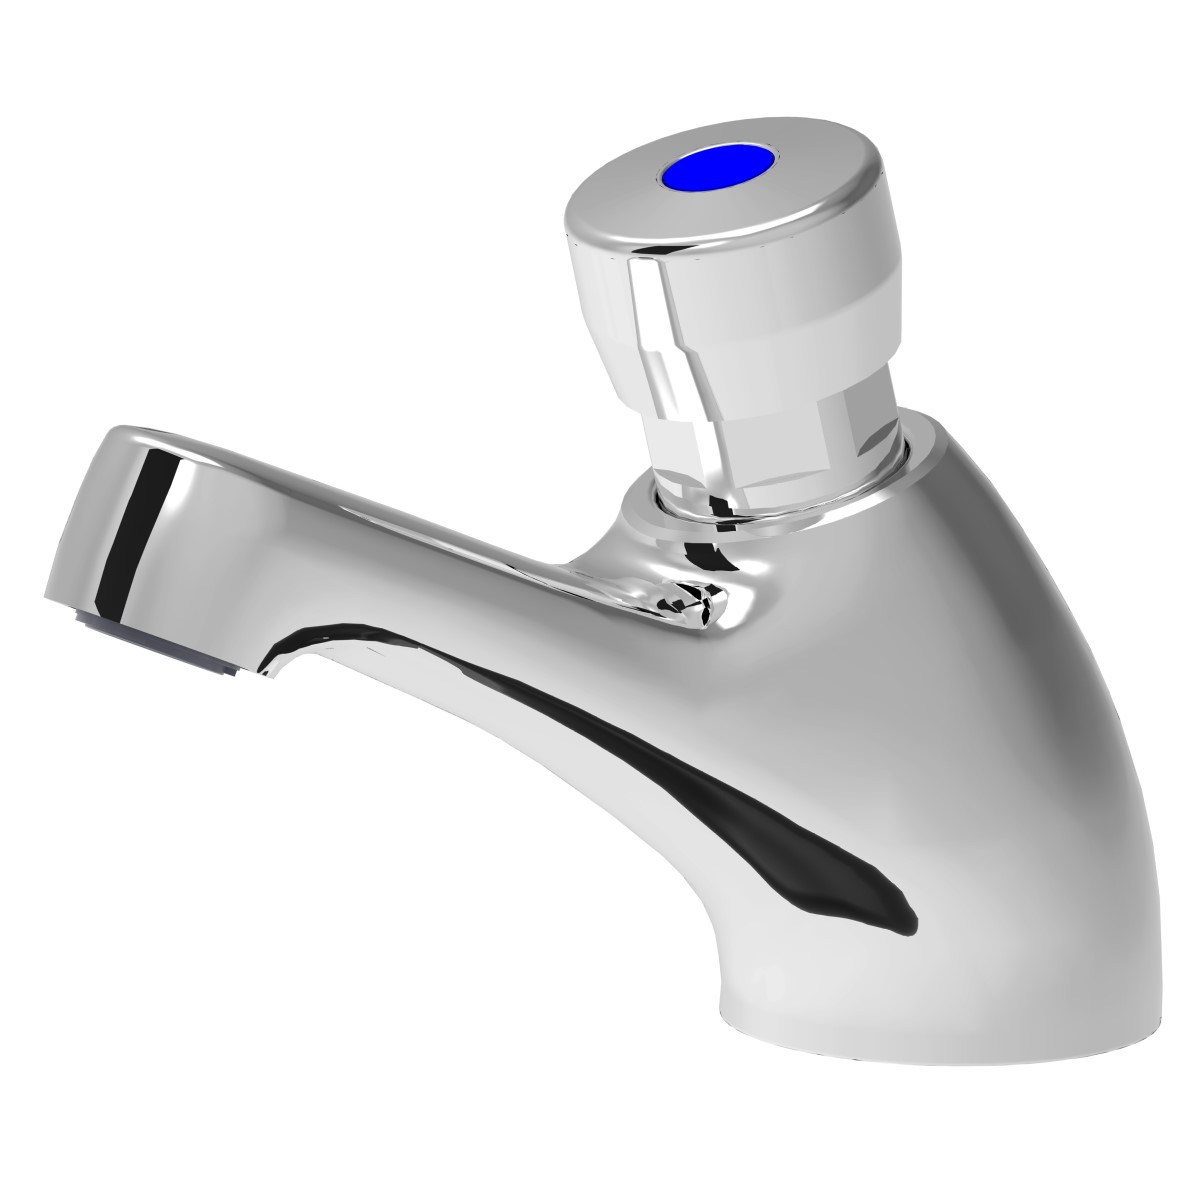 Push-button operated tap with time control only cold water